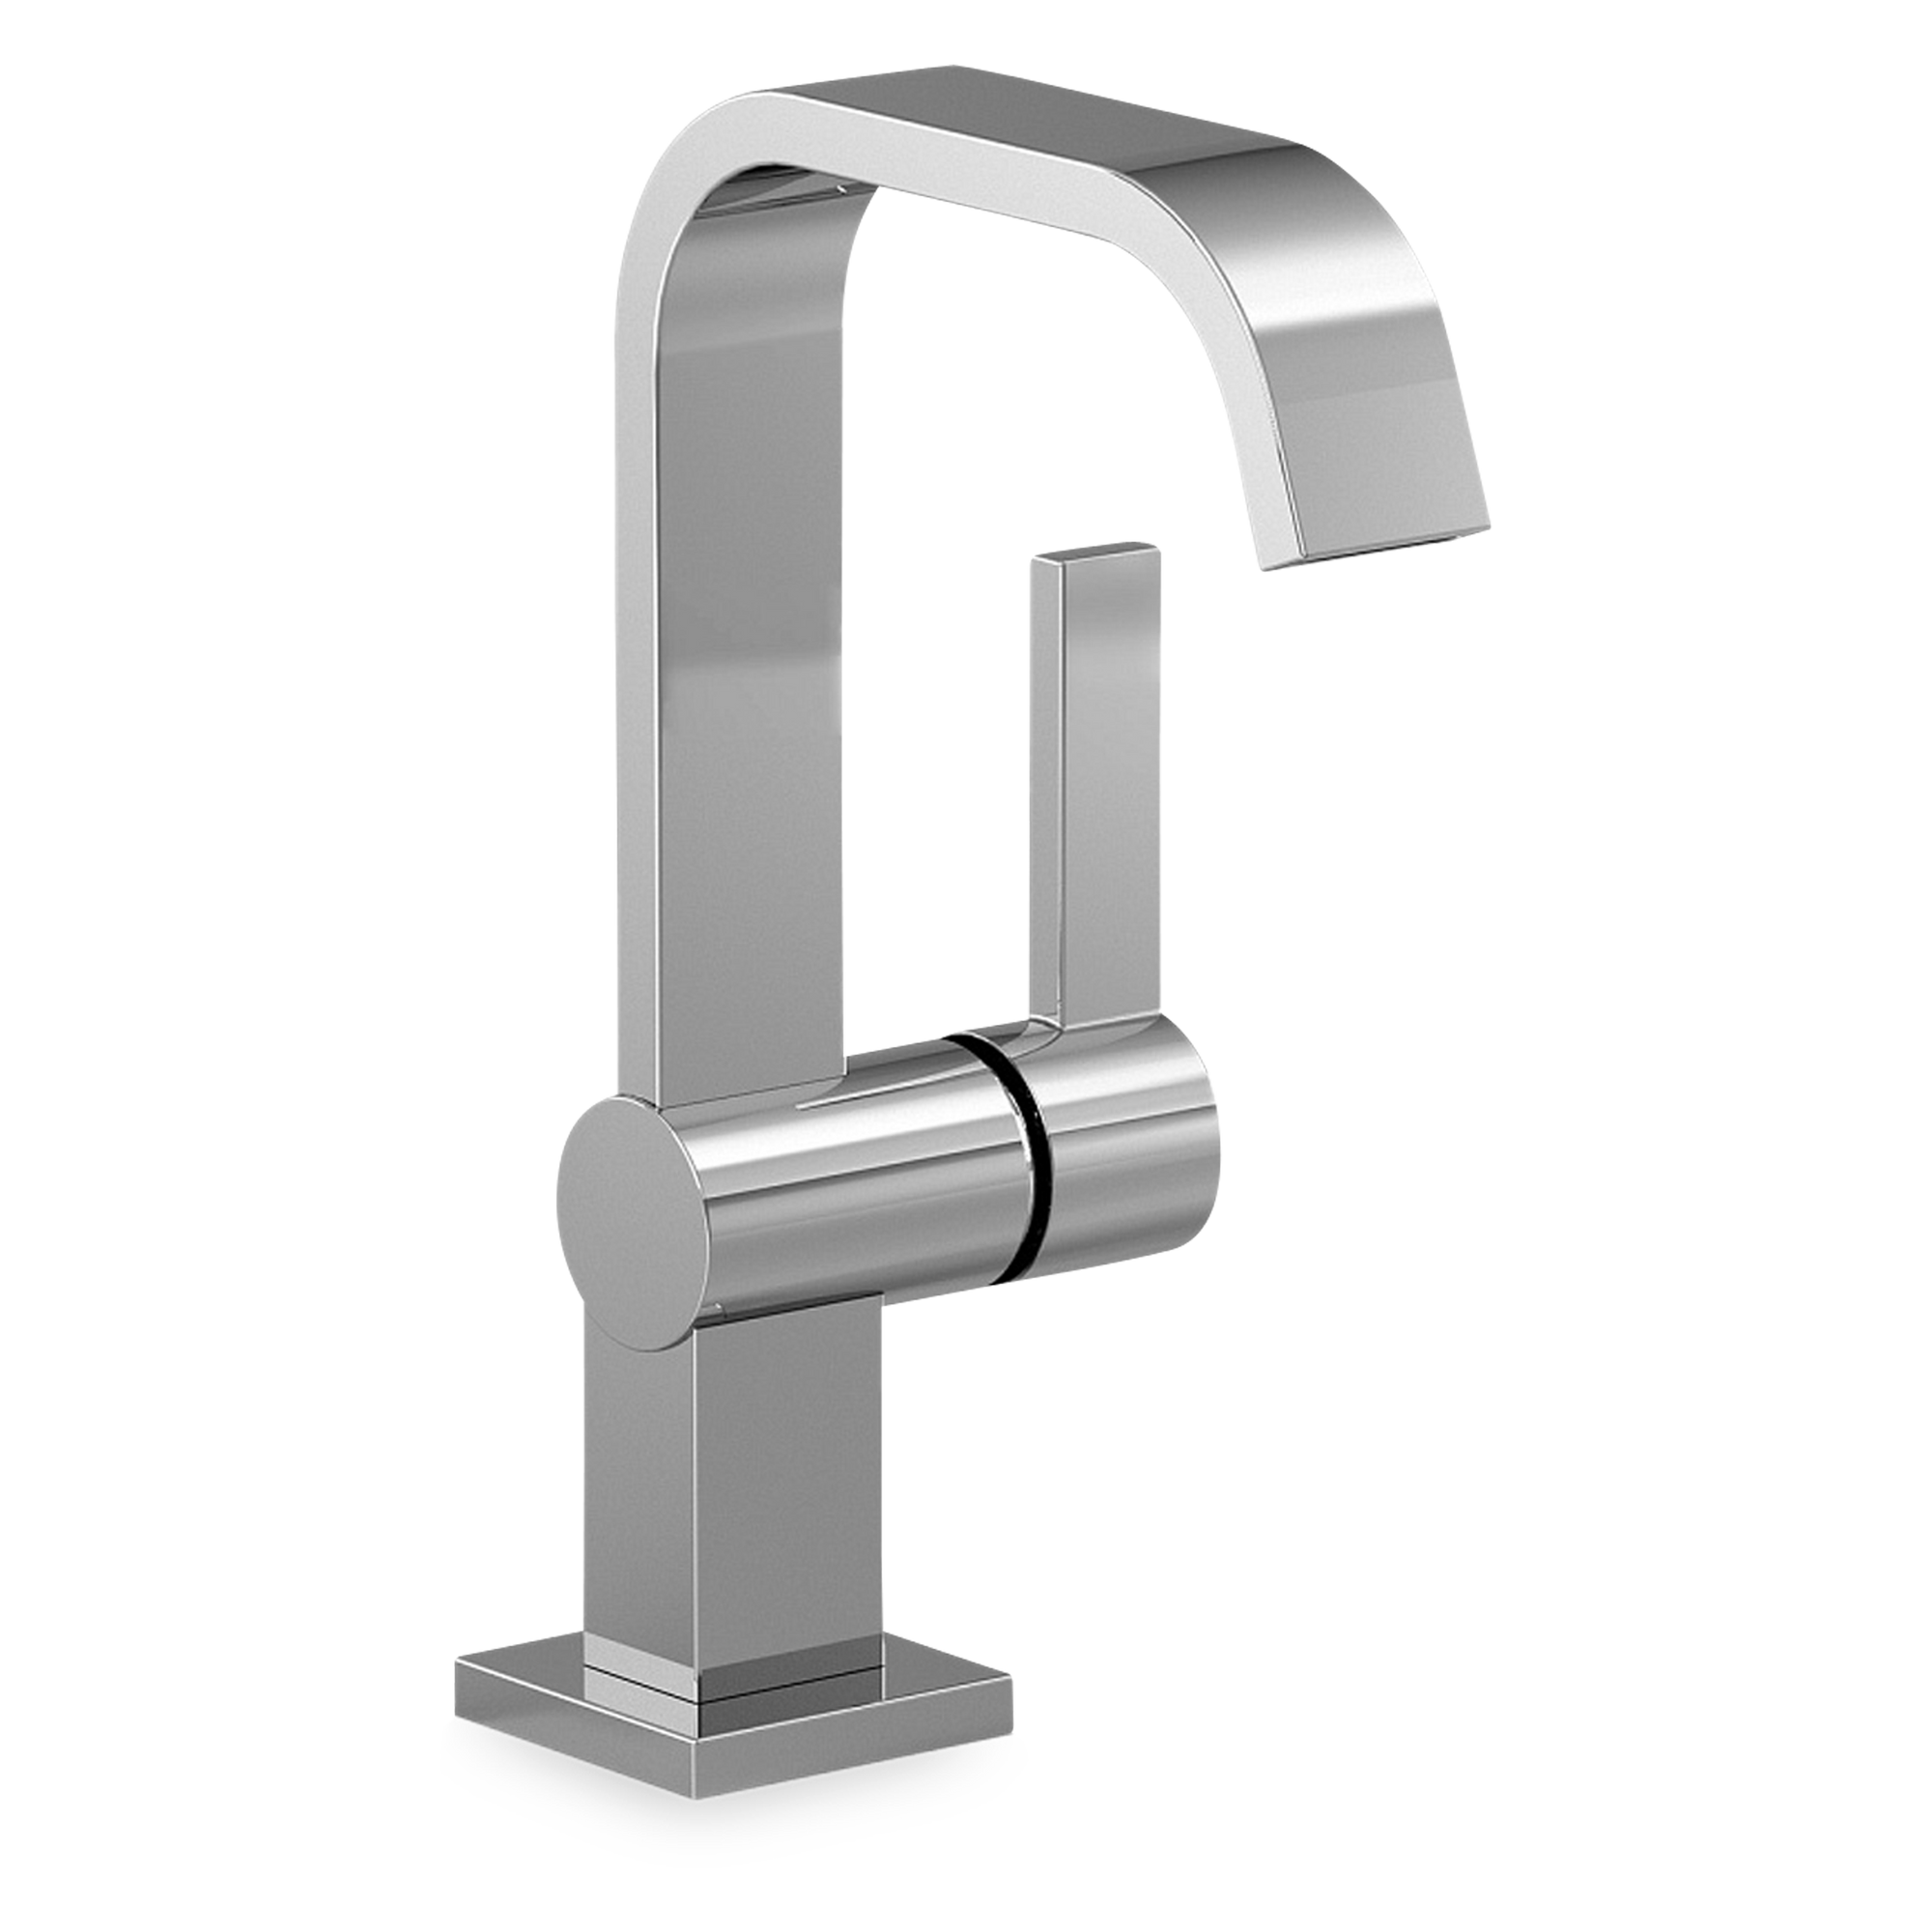 The Dornbracht Imo Faucet (Tall Without Drain) is a single-lever lavatory mixer with raised spout.